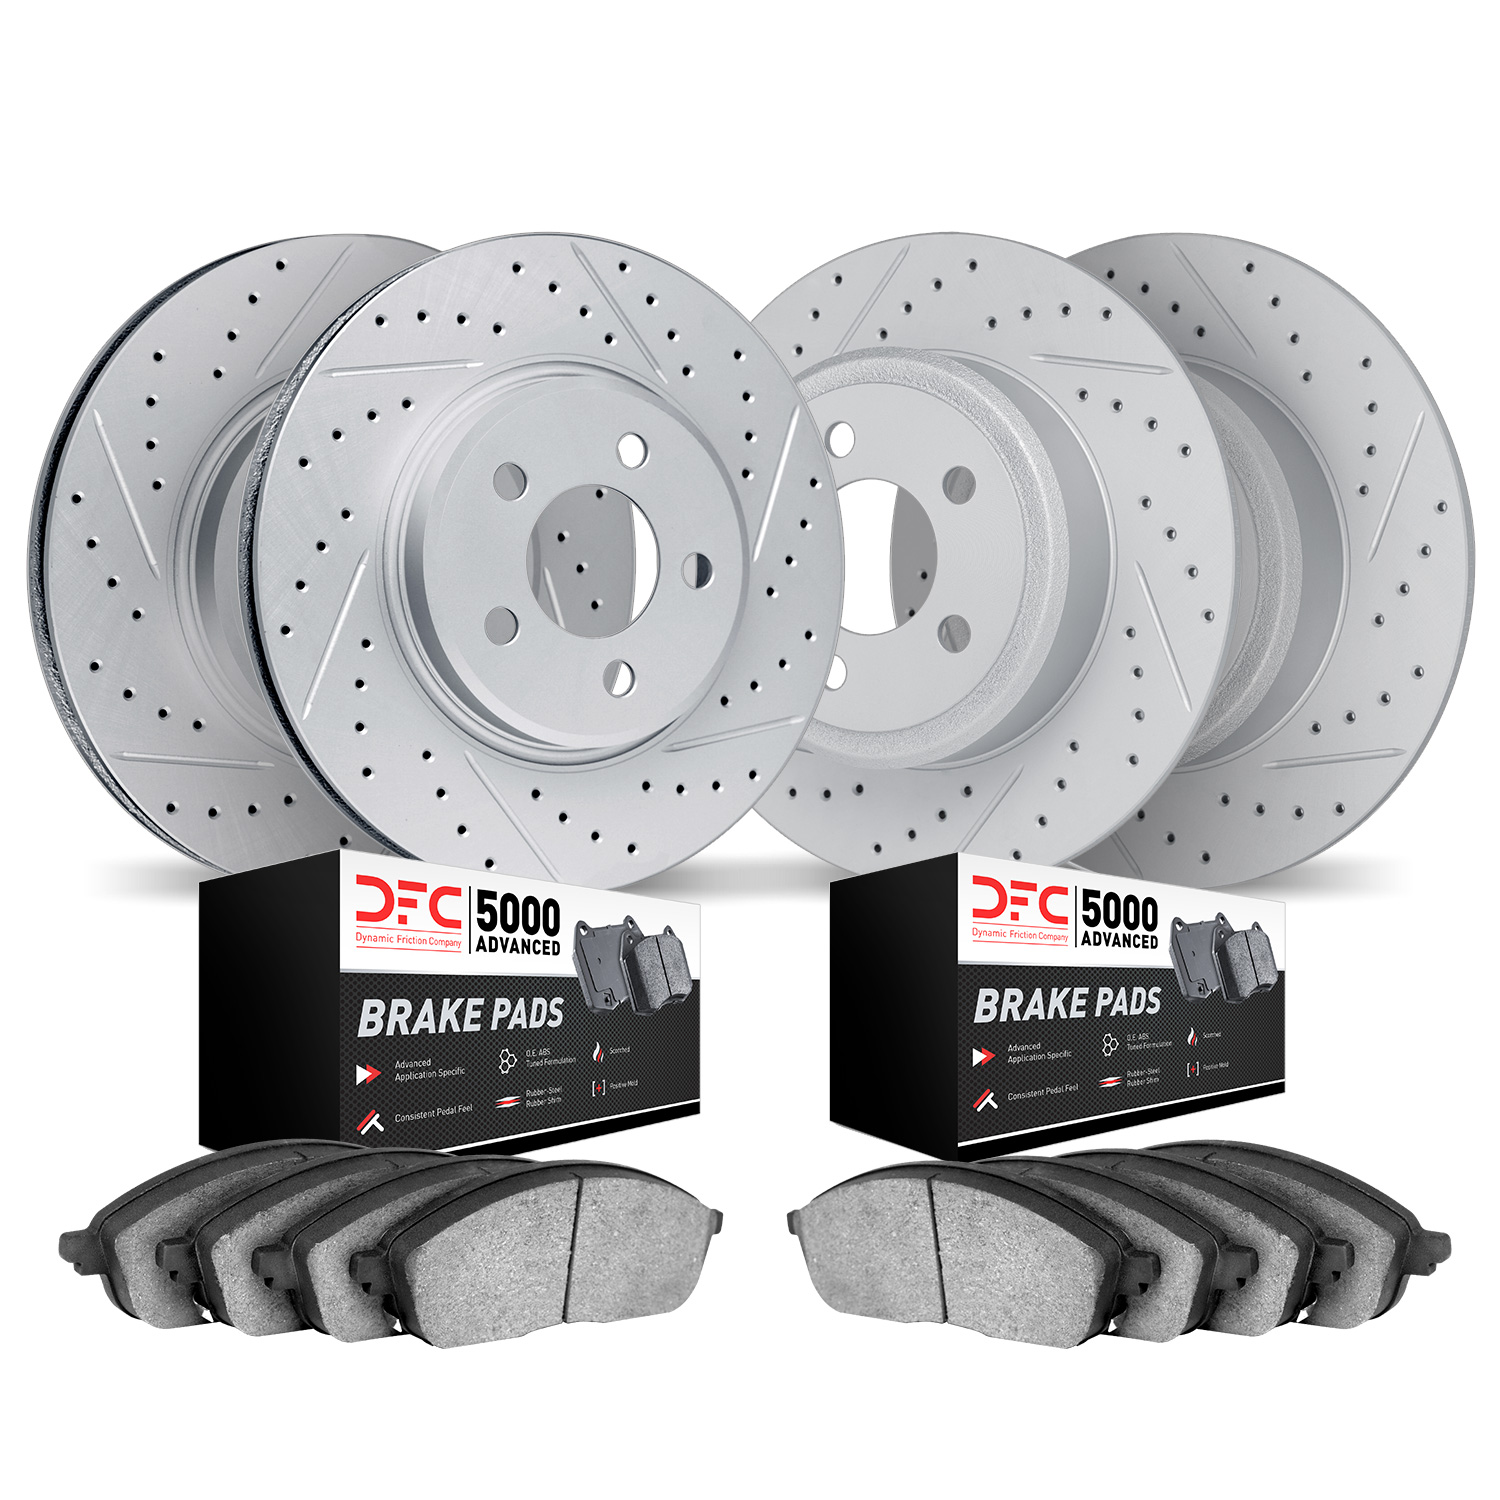 2504-59038 Geoperformance Drilled/Slotted Rotors w/5000 Advanced Brake Pads Kit, Fits Select Acura/Honda, Position: Front and Re